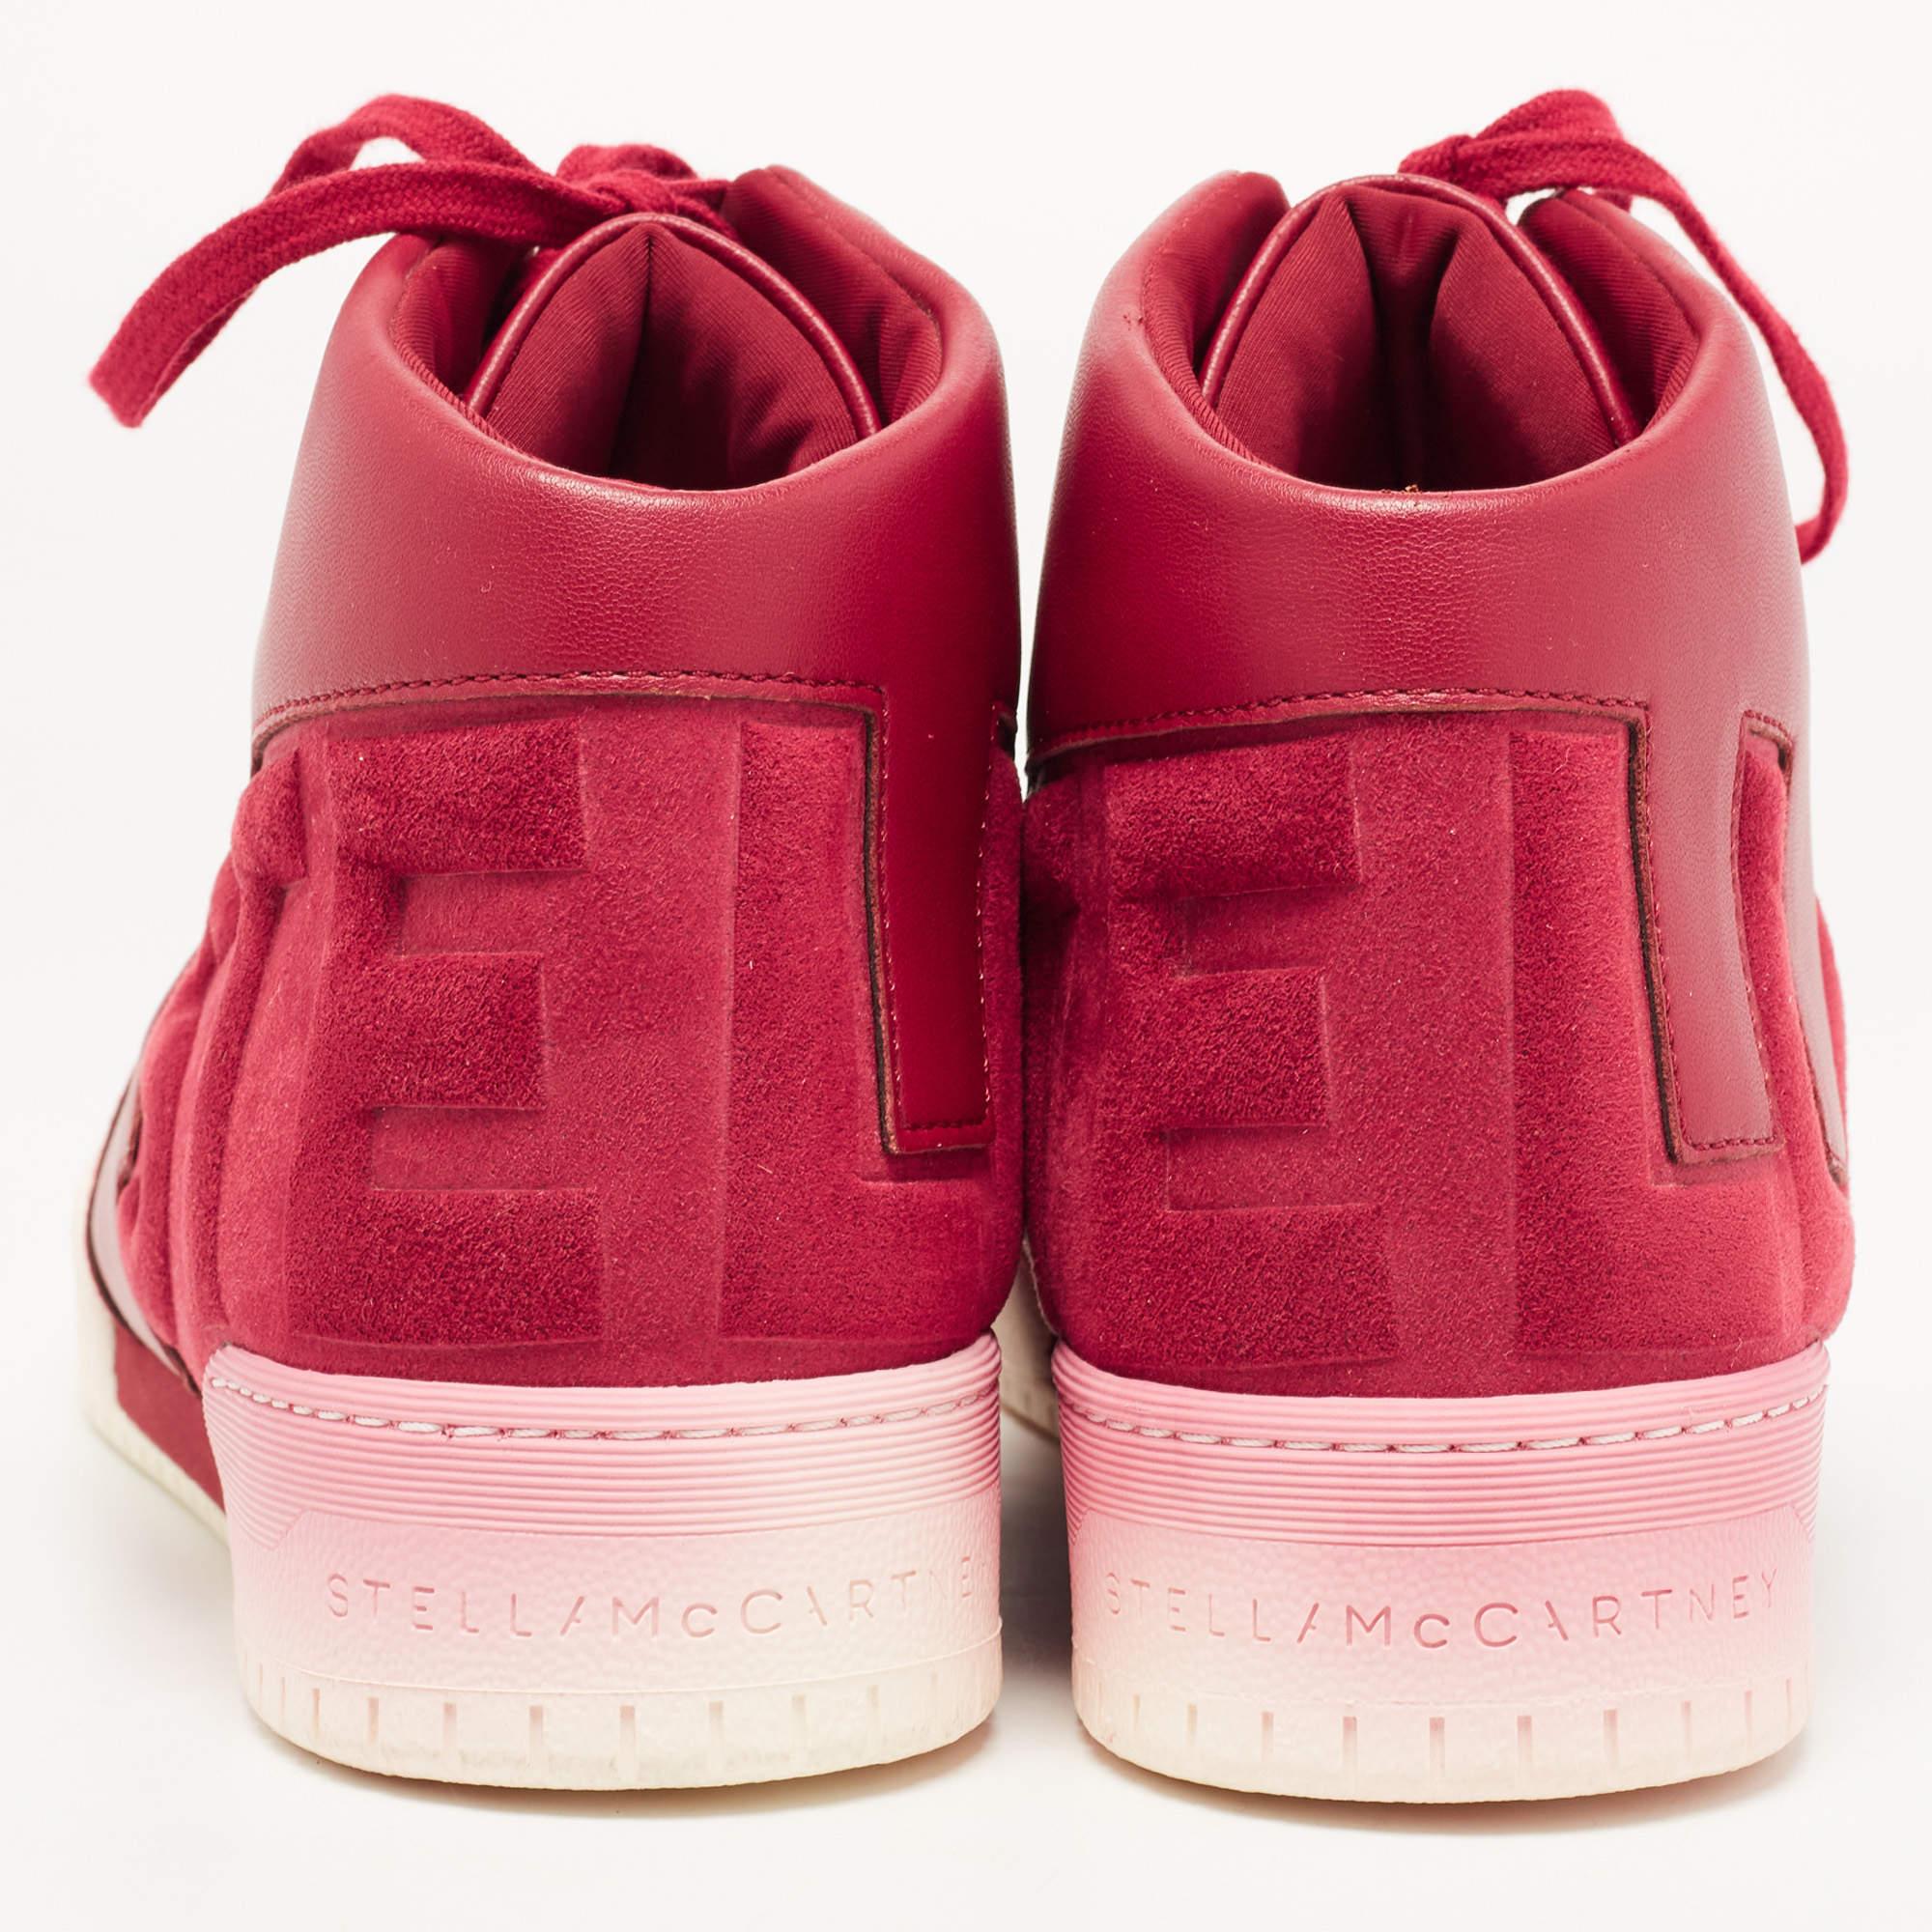 Stella McCartney Red Faux Leather and Faux Suede High Top Sneakers Size 37 In New Condition In Dubai, Al Qouz 2